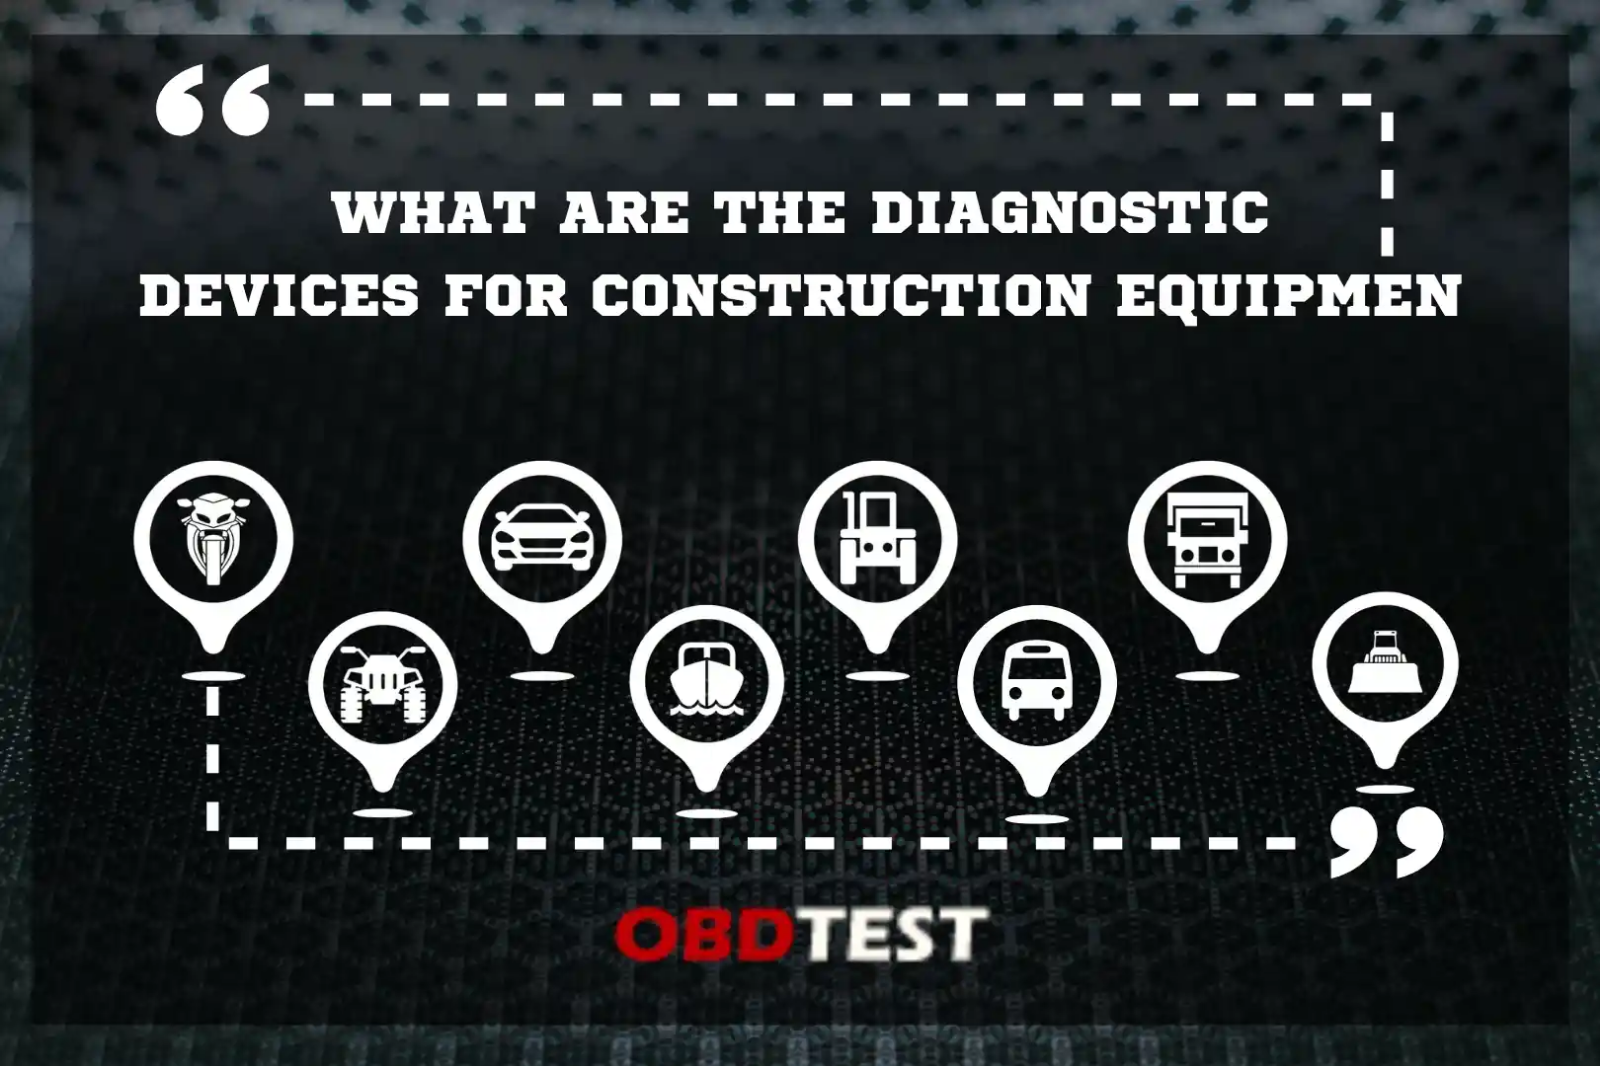 What is the diagnostic tool for construction equipment?